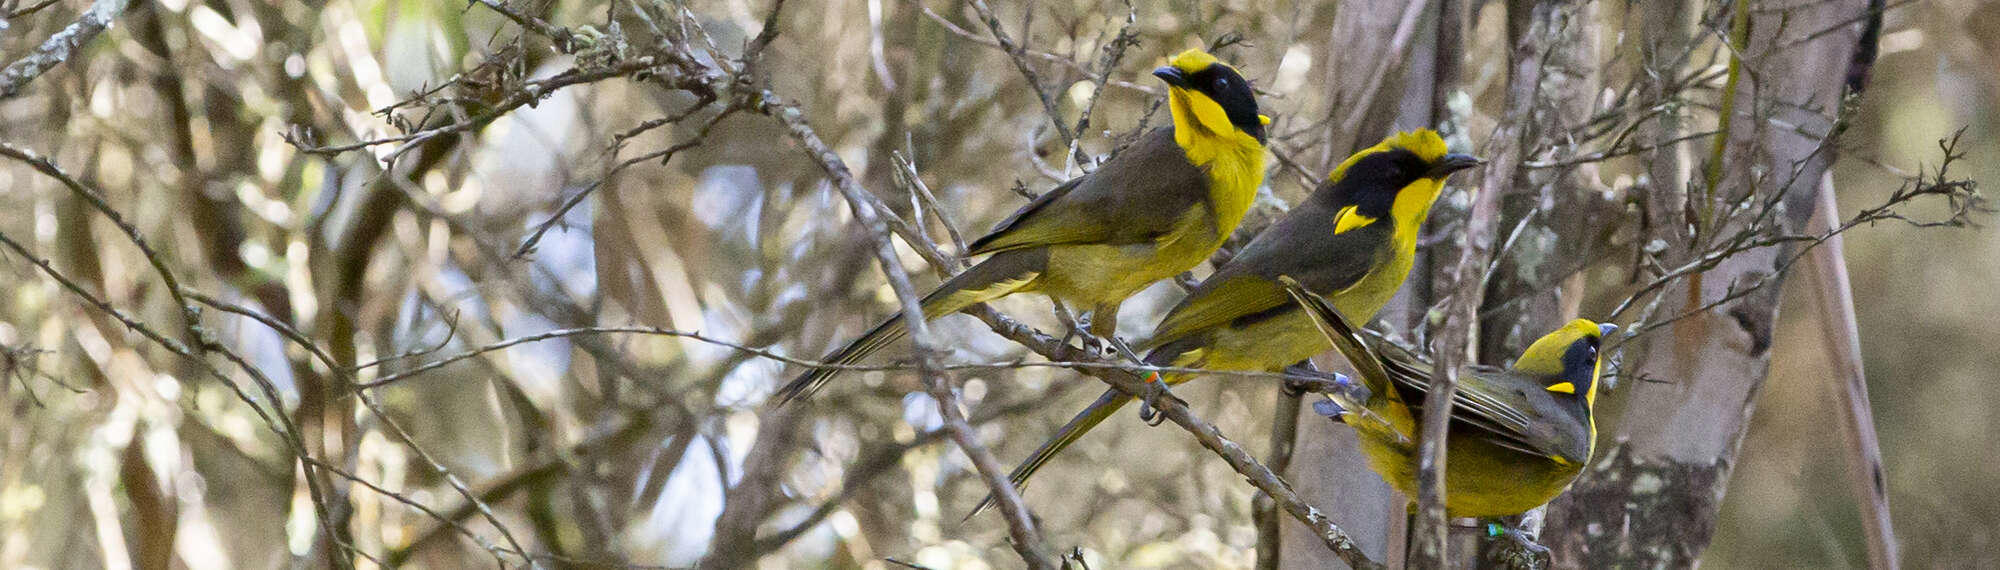 Three Helmeted Honeyeaters out in wild